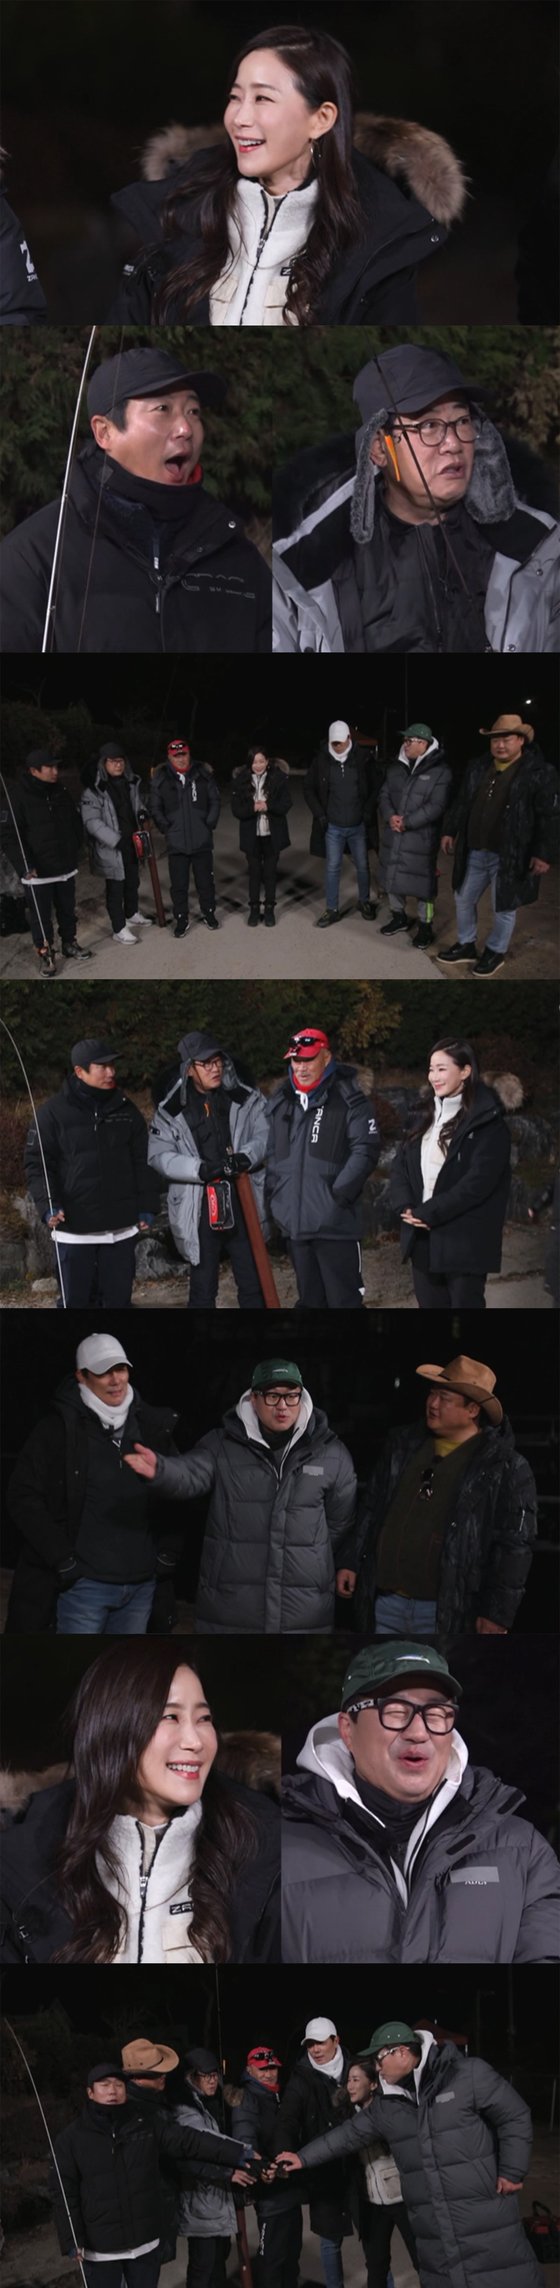 Actor Kim Ha-Young will be stormed as City Fisherman 2 guestKim Ha-Young will join the guest while performing trout fishing battles in Cheonan, Chungnam Province, 54 times of Channel A entertainment program Follow Me Only, City Fisher 2 (hereinafter referred to as City Fisher 2), which will be broadcast on the 31st (Thursday).Lee Duk-hwa, a big brother, said, I do not think of a name because I have seen a lot of faces. Lee Soo-geun said, Gag woman!He expressed his gratitude for the wrong number and embarrassed Kim Ha-Young.Kim Ha-Young, who has been sweating since the beginning, introduced himself as a woman who opens Sunday morning, Actor Kim Ha-Young, and everyone was happy to explain Surprise girl and was transformed into a posture.Lee Soo-geun asked, Didnt you say you were dating Yu Minsang? and made Kim Ha-Young sweat once again.At that time, Ji Sang-ryeol is said to have revealed a special relationship with Kim Ha-Young in the past.In Ji Sang-ryeols past reference, Kim Ha-Young said, Pink air current ...When the unusual air flow flowed on the scene, Ji Sang-ryeol told Kim Ha-Young, Lets live together.Kim Ha-Young is a female actor who is known to be good at fishing.It is known that he carried a fishing rod in a car, and he has gathered topics and posted a fishing certification shot on SNS.Kim Ha-Young said, We have to win, we have to win. He said that he showed his passion before fishing, raising expectations for the broadcast.Kim Ha-Youngs fishing skills and special relationship with Ji Sang-ryeol will be unveiled at Channel A City Fisher 2 at 9:50 pm on the 31st (Thursday).